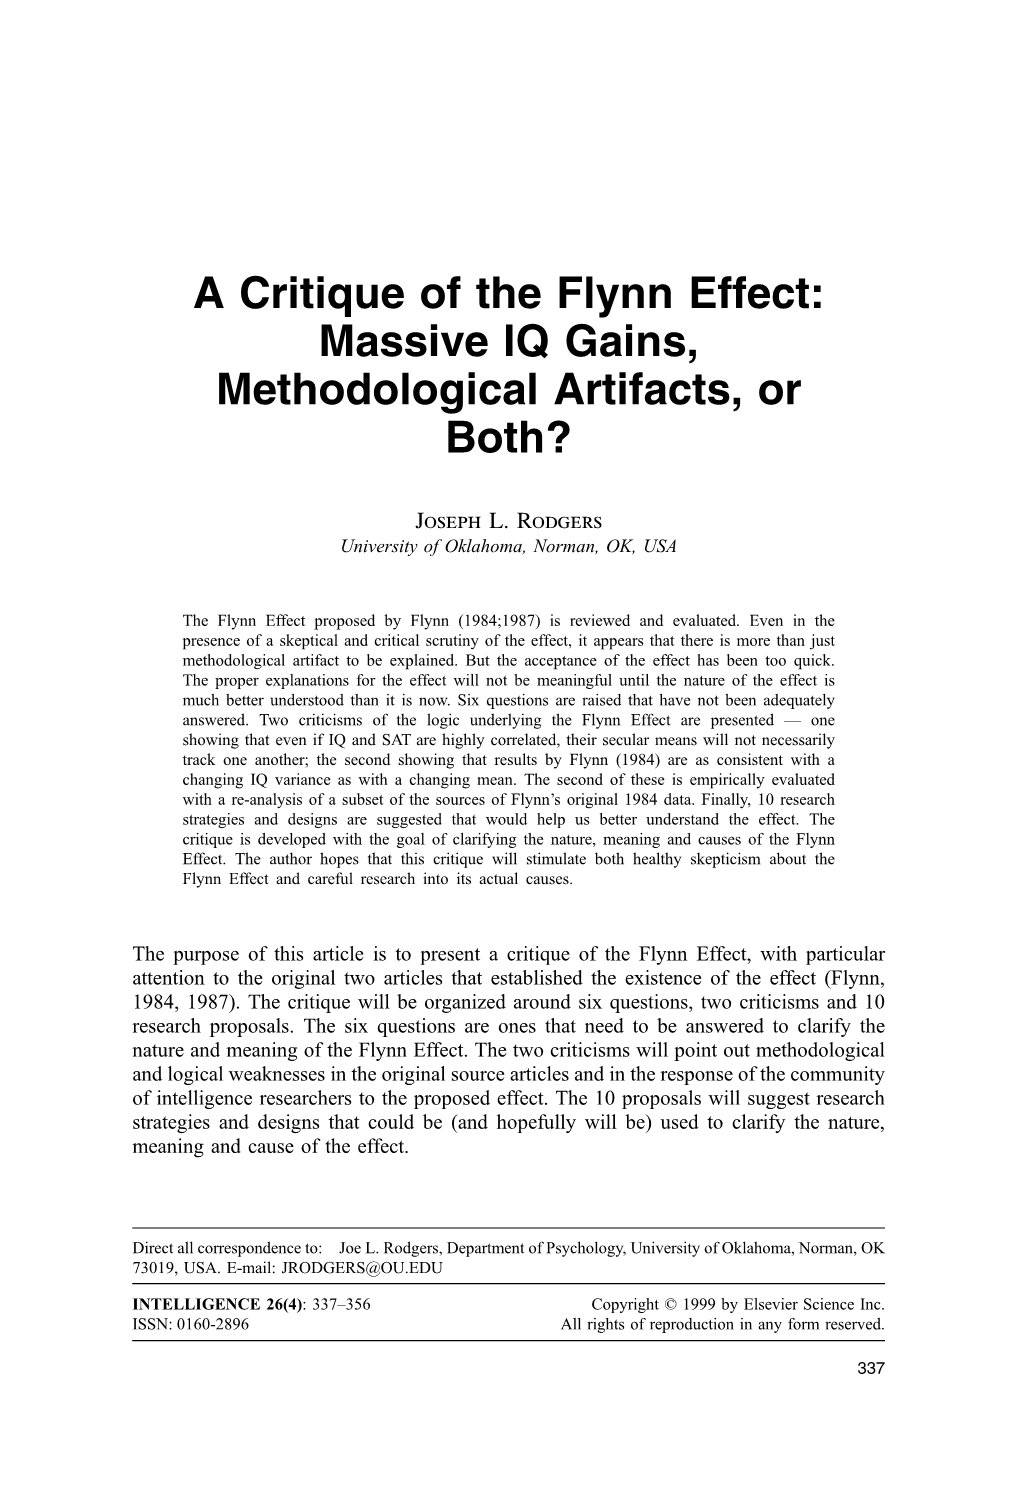 A Critique of the Flynn Effect: Massive IQ Gains, Methodological Artifacts, Or Both?